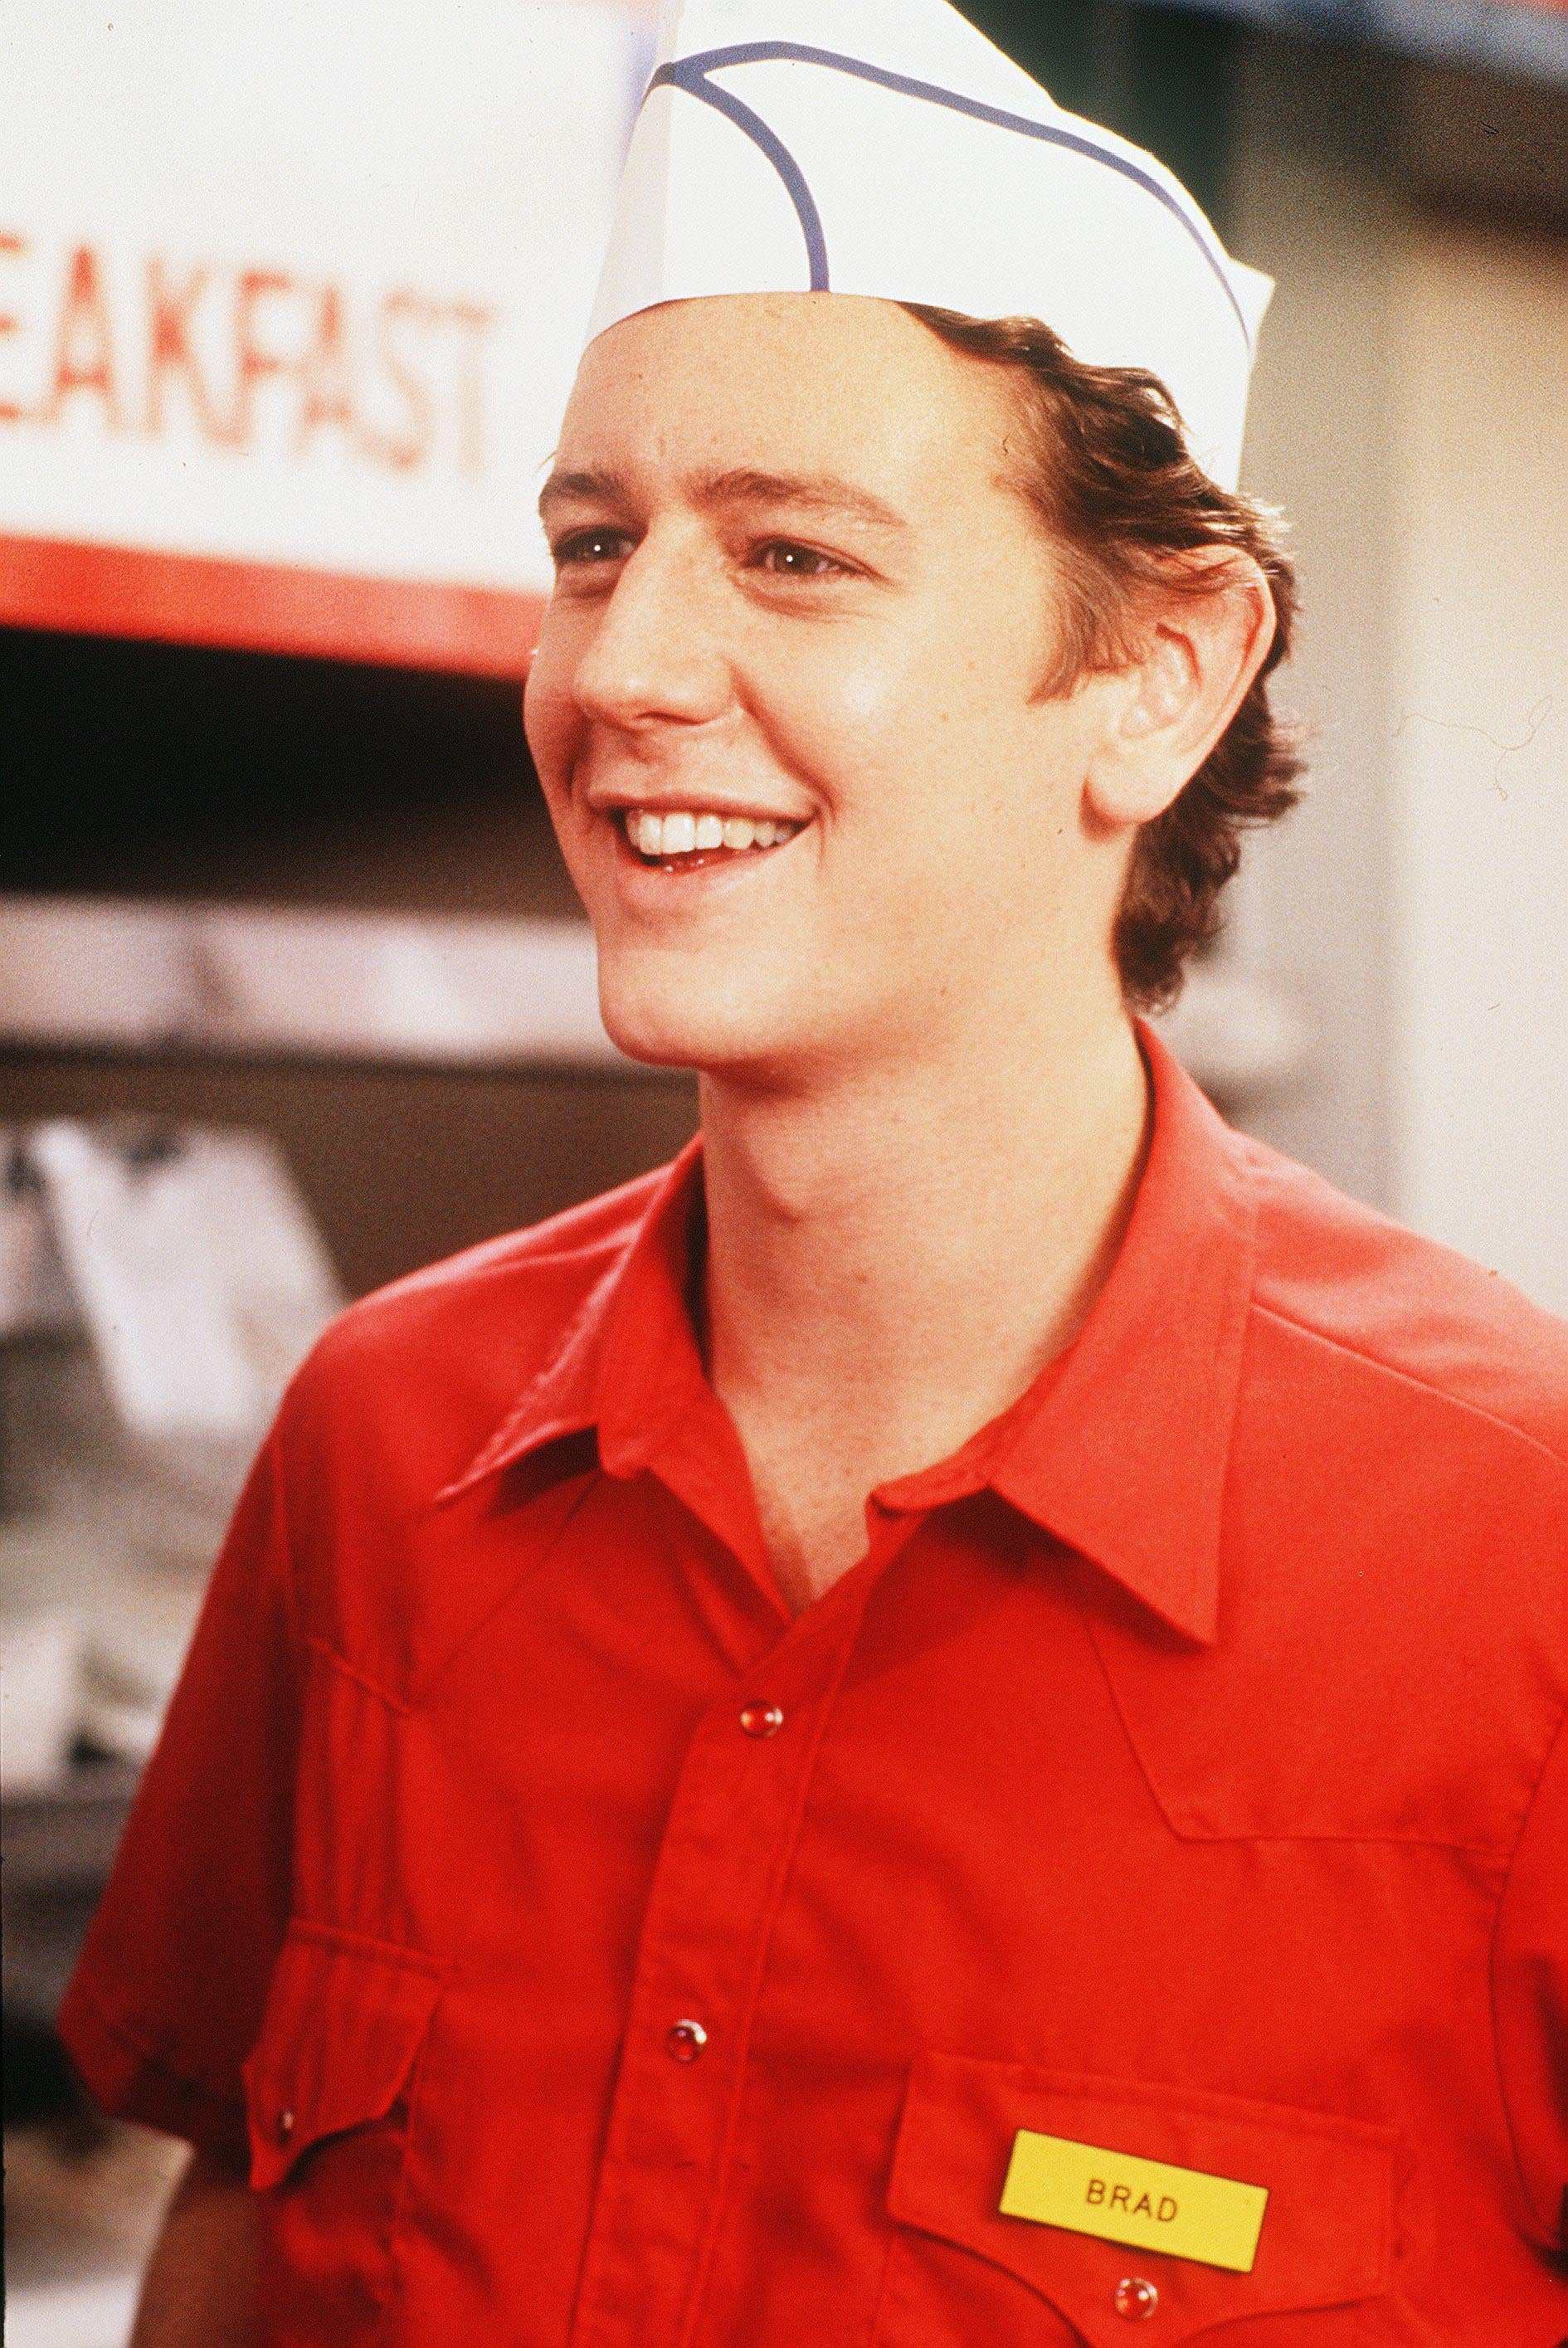 beverly hills cop, judge reinhold on beverly hills cop: axel f: ‘i’m proud to play a cop’